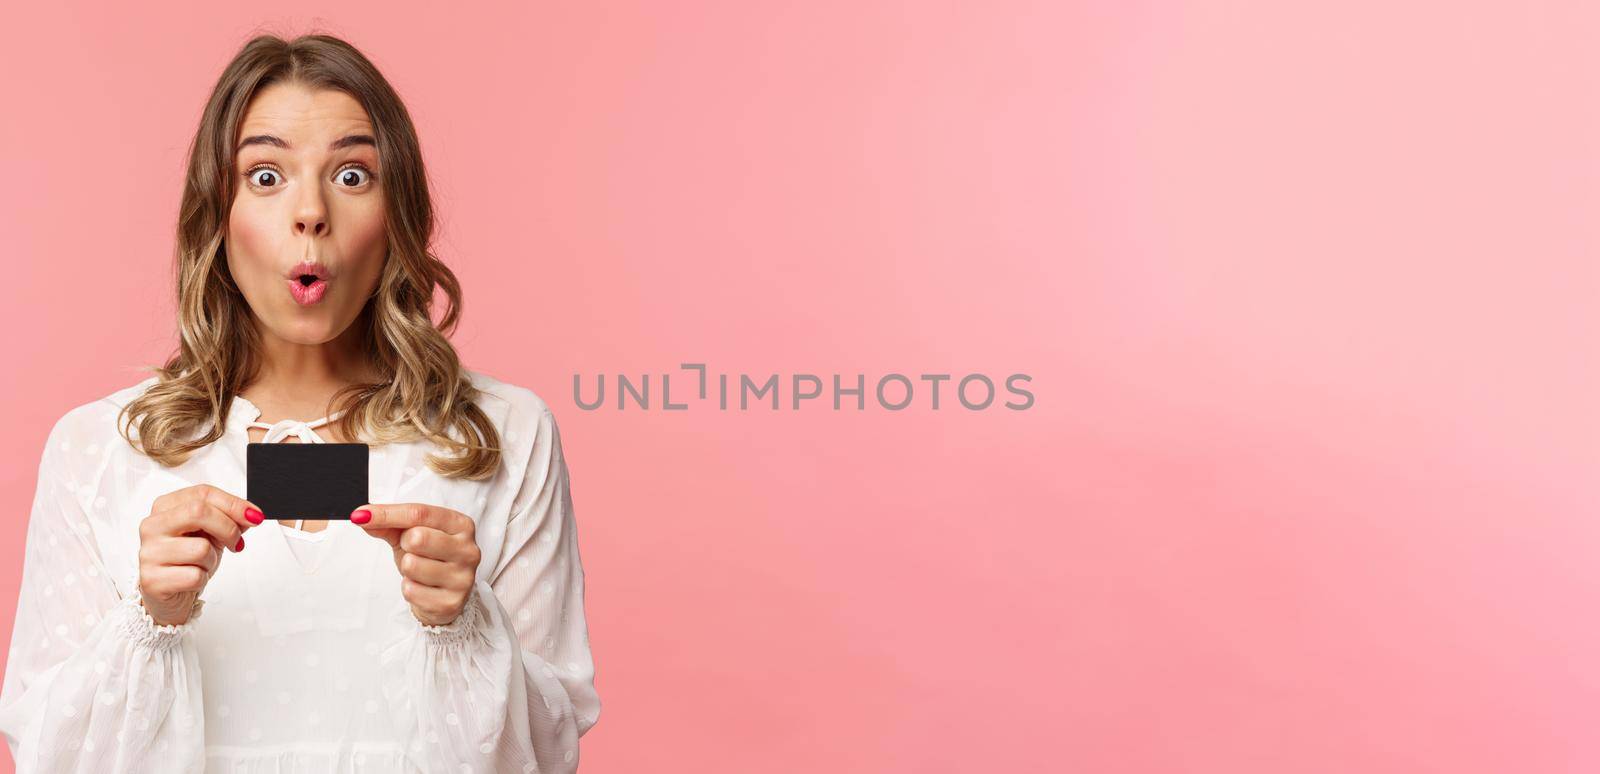 Close-up portrait of excited and amused young girl describe new features of her bank, received new credit card, say wow, folding lips thrilled and amazed, standing pink background.